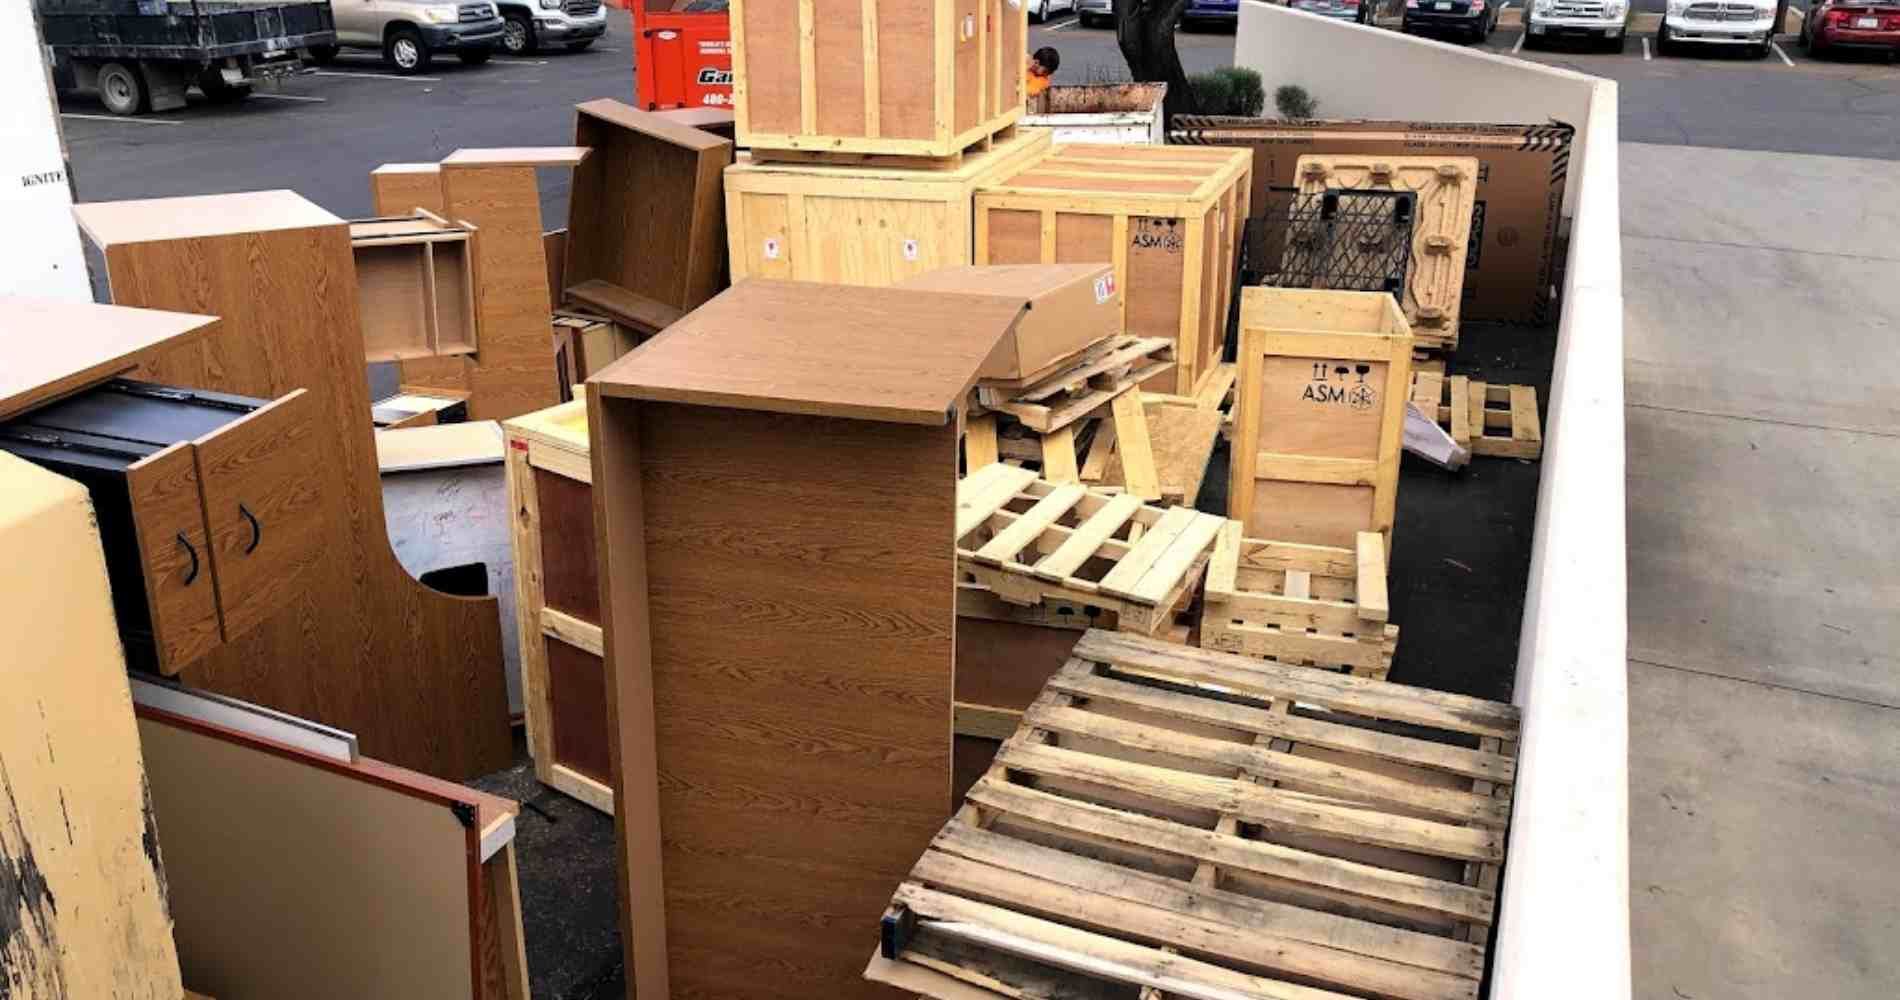 #1 for Pallet Disposal in Arcadia, AZ With Over 1200 5-Star Reviews!